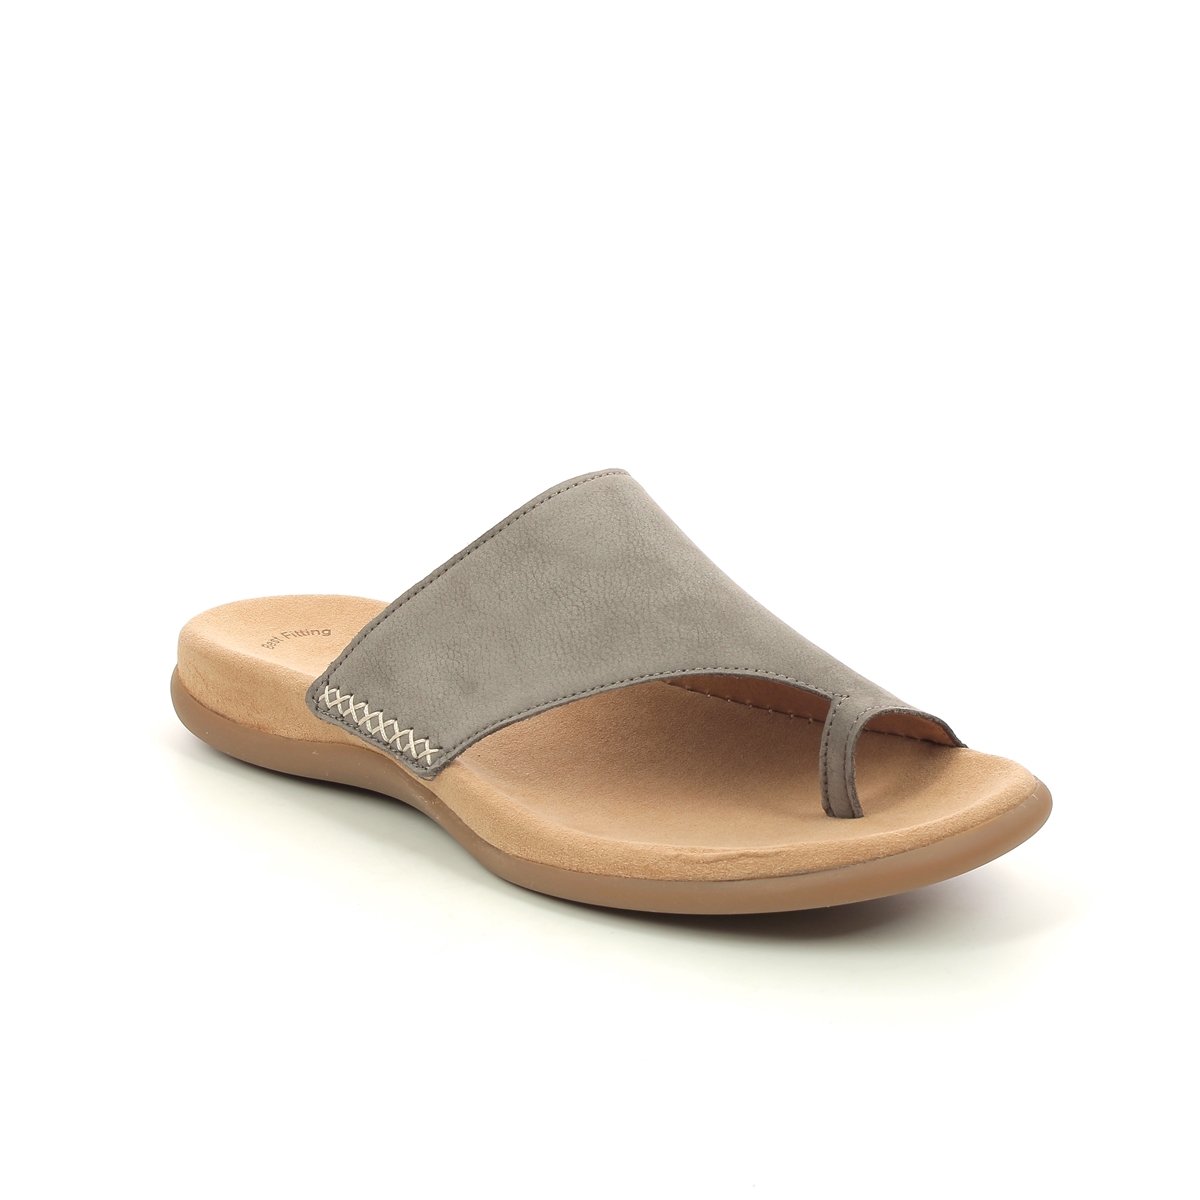 Gabor Lanzarote Taupe Nubuck Womens Toe Post Sandals 03.700.13 In Size 40 In Plain Taupe Nubuck  Womens Comfortable Sandals In Soft Taupe Nubuck Leath